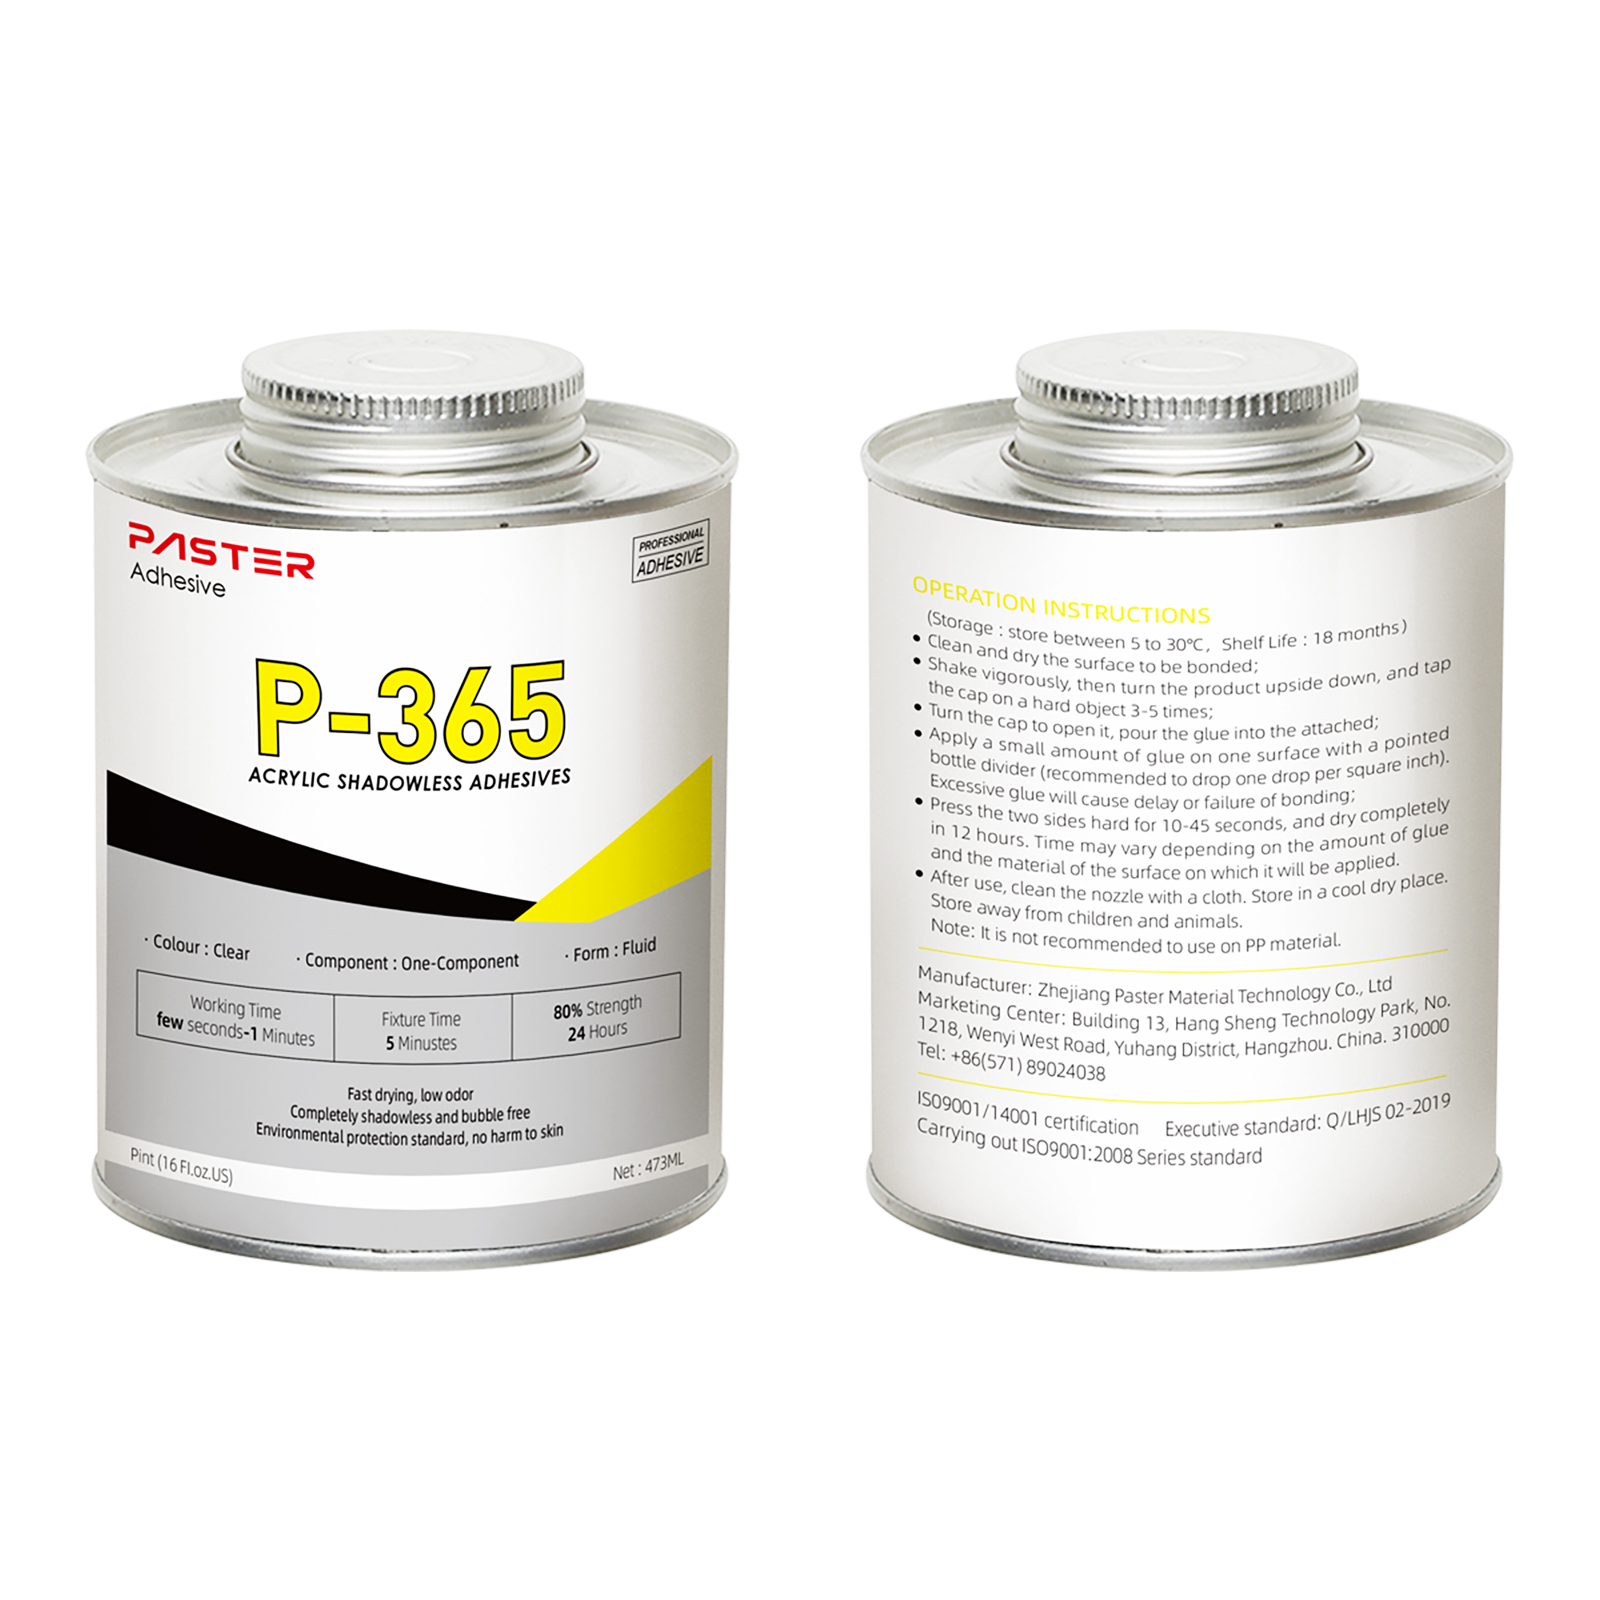 Sample-P-365 Acrylic Shadowless Adhesive for Channel Letter